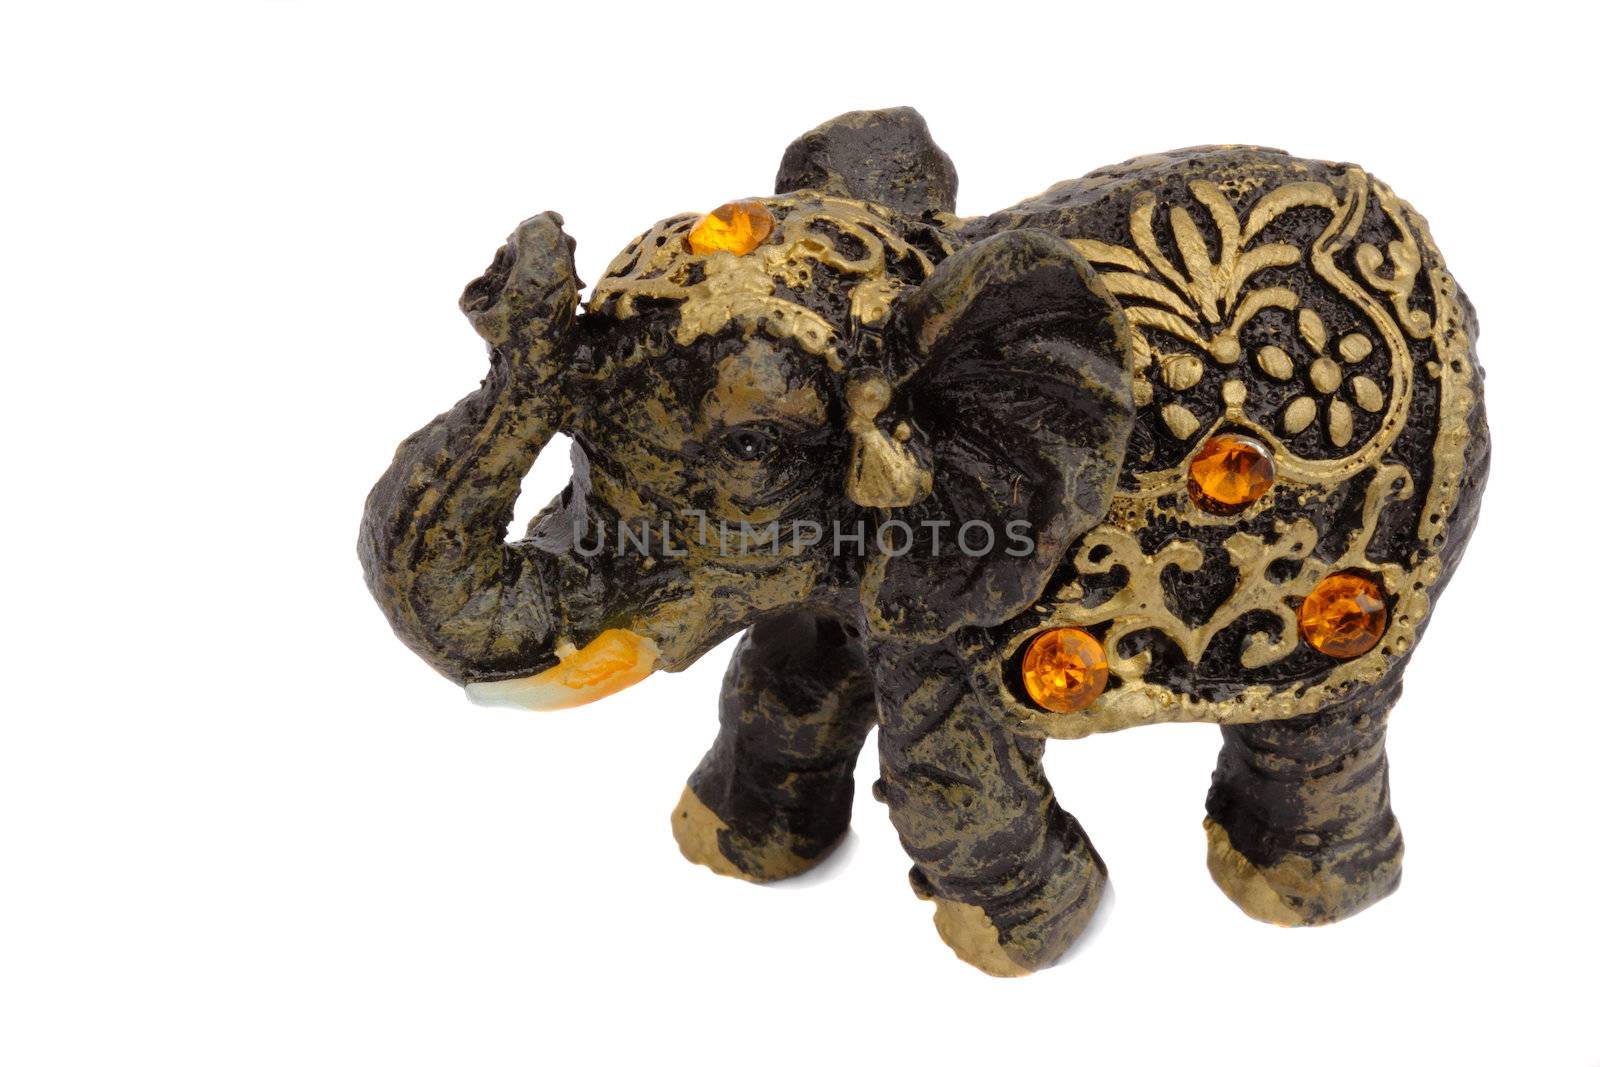 Figurine of a cute elephant, decorated with amber. by georgina198